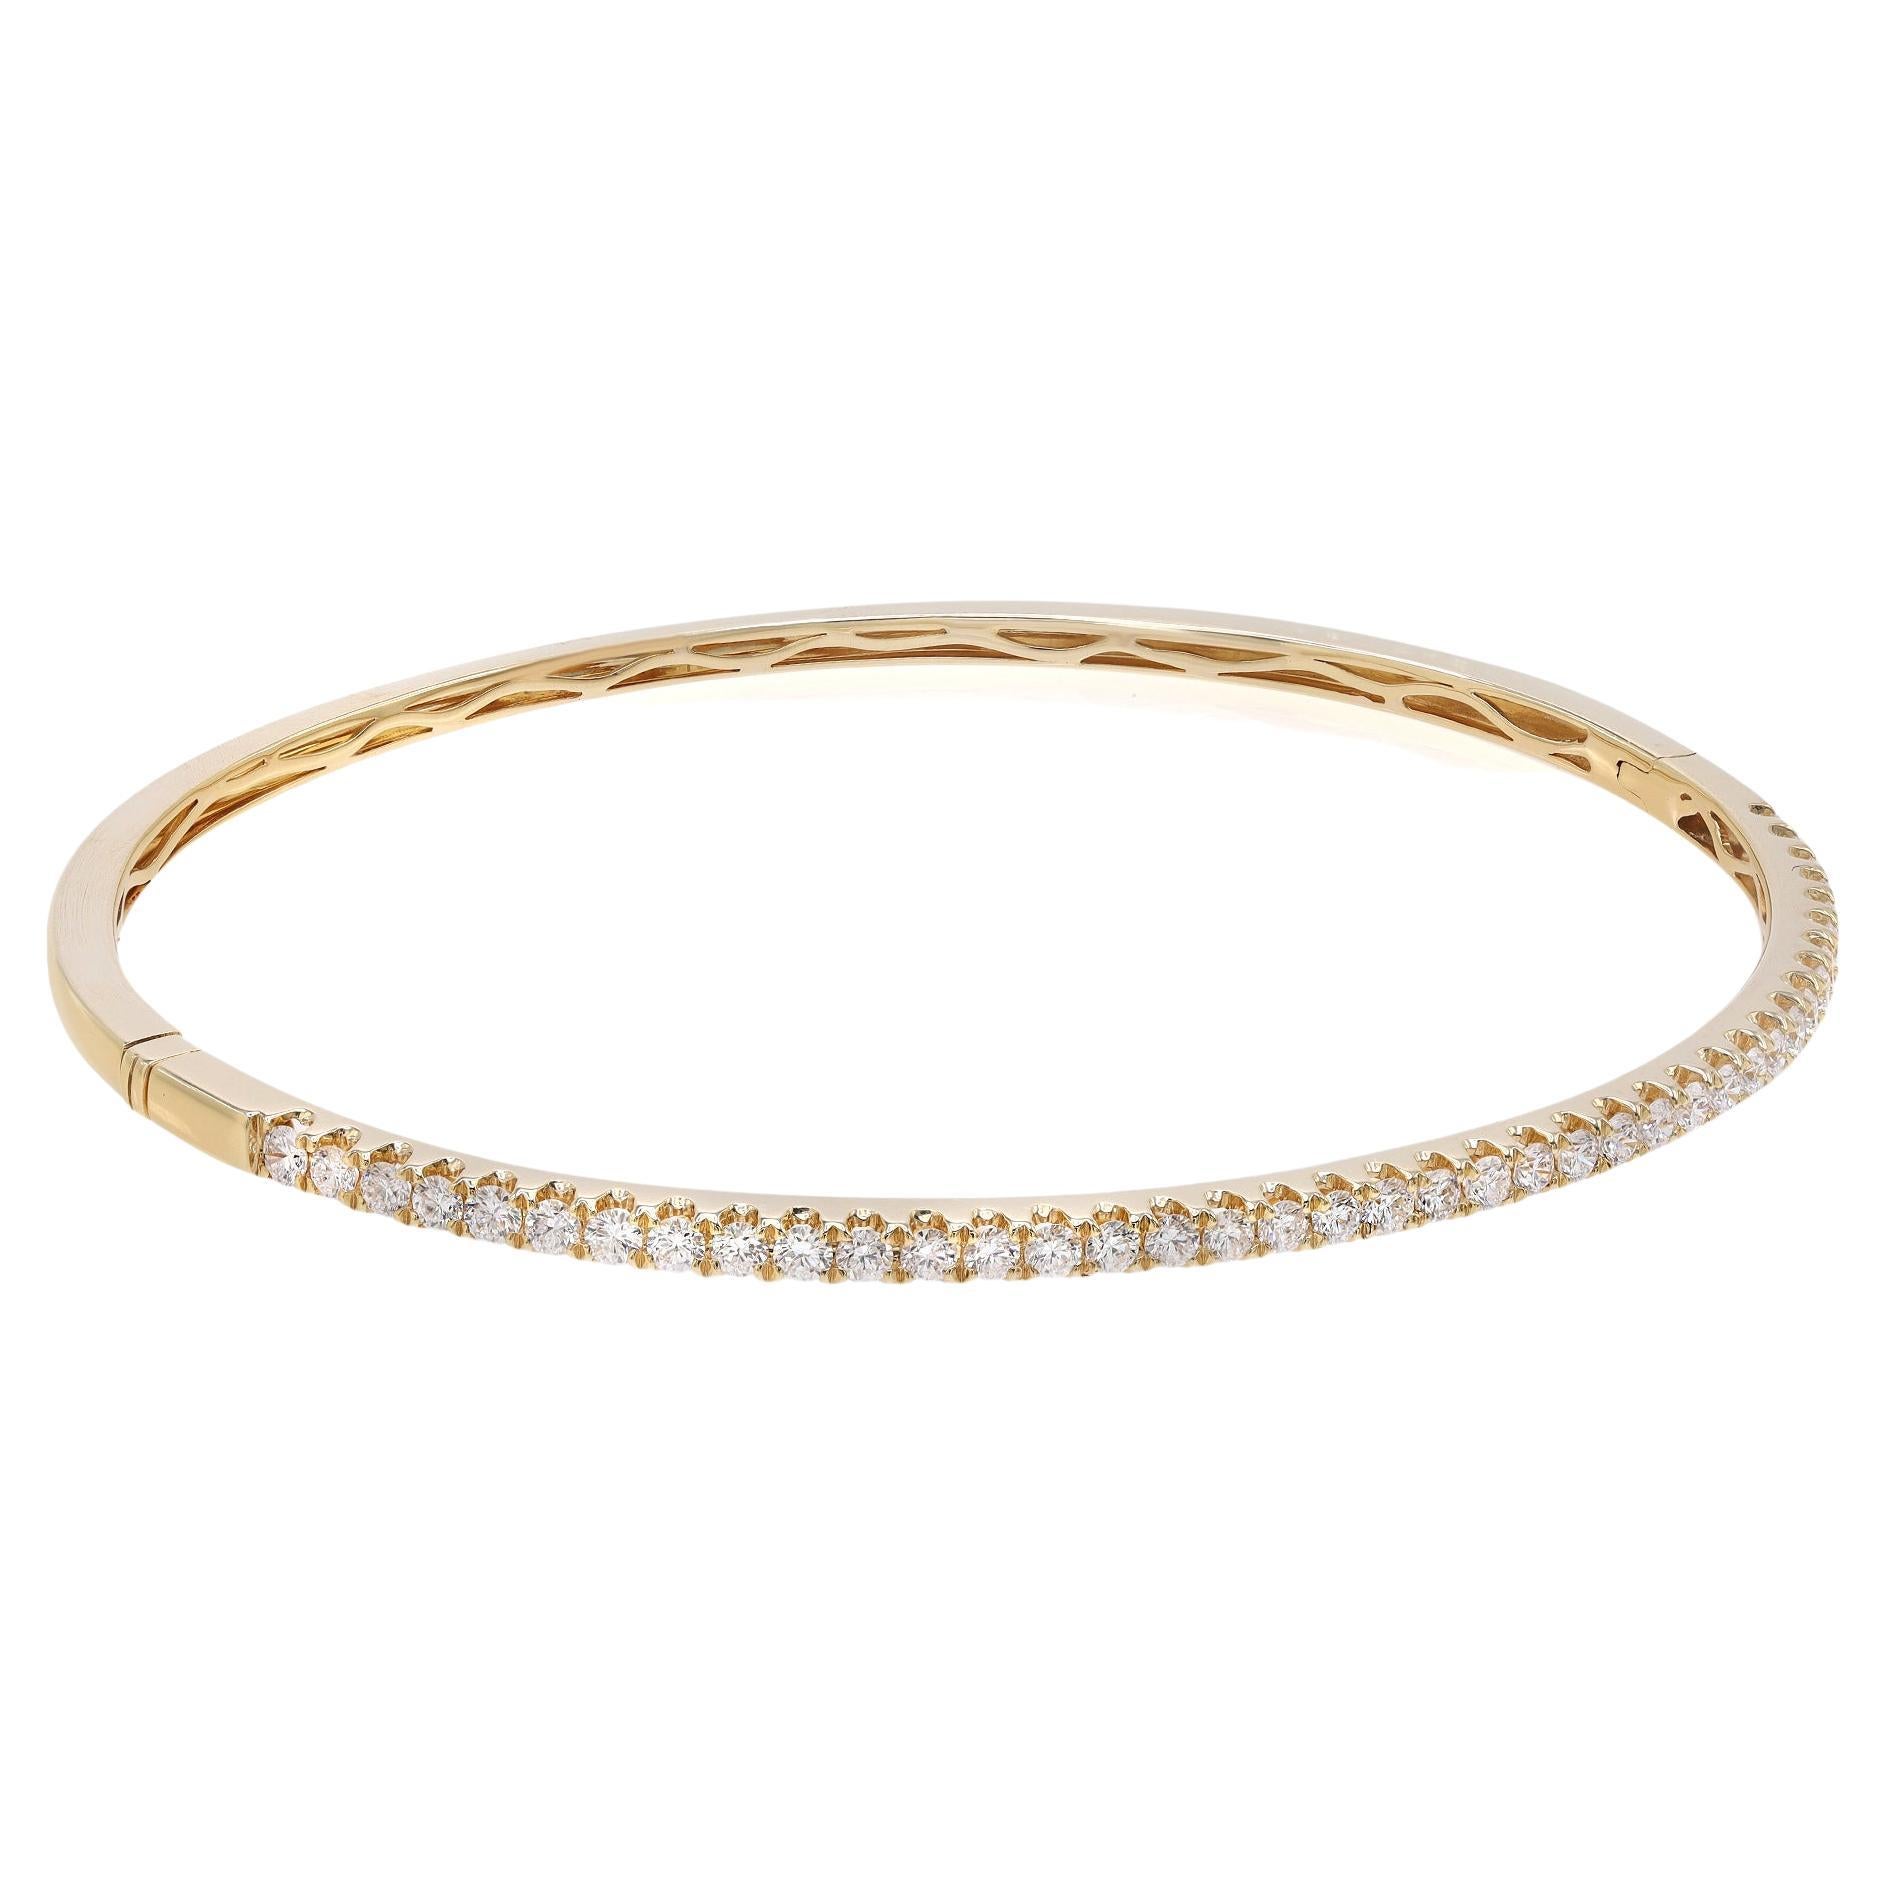 Empreinte Bangle, Yellow Gold And Pave Diamonds - Categories